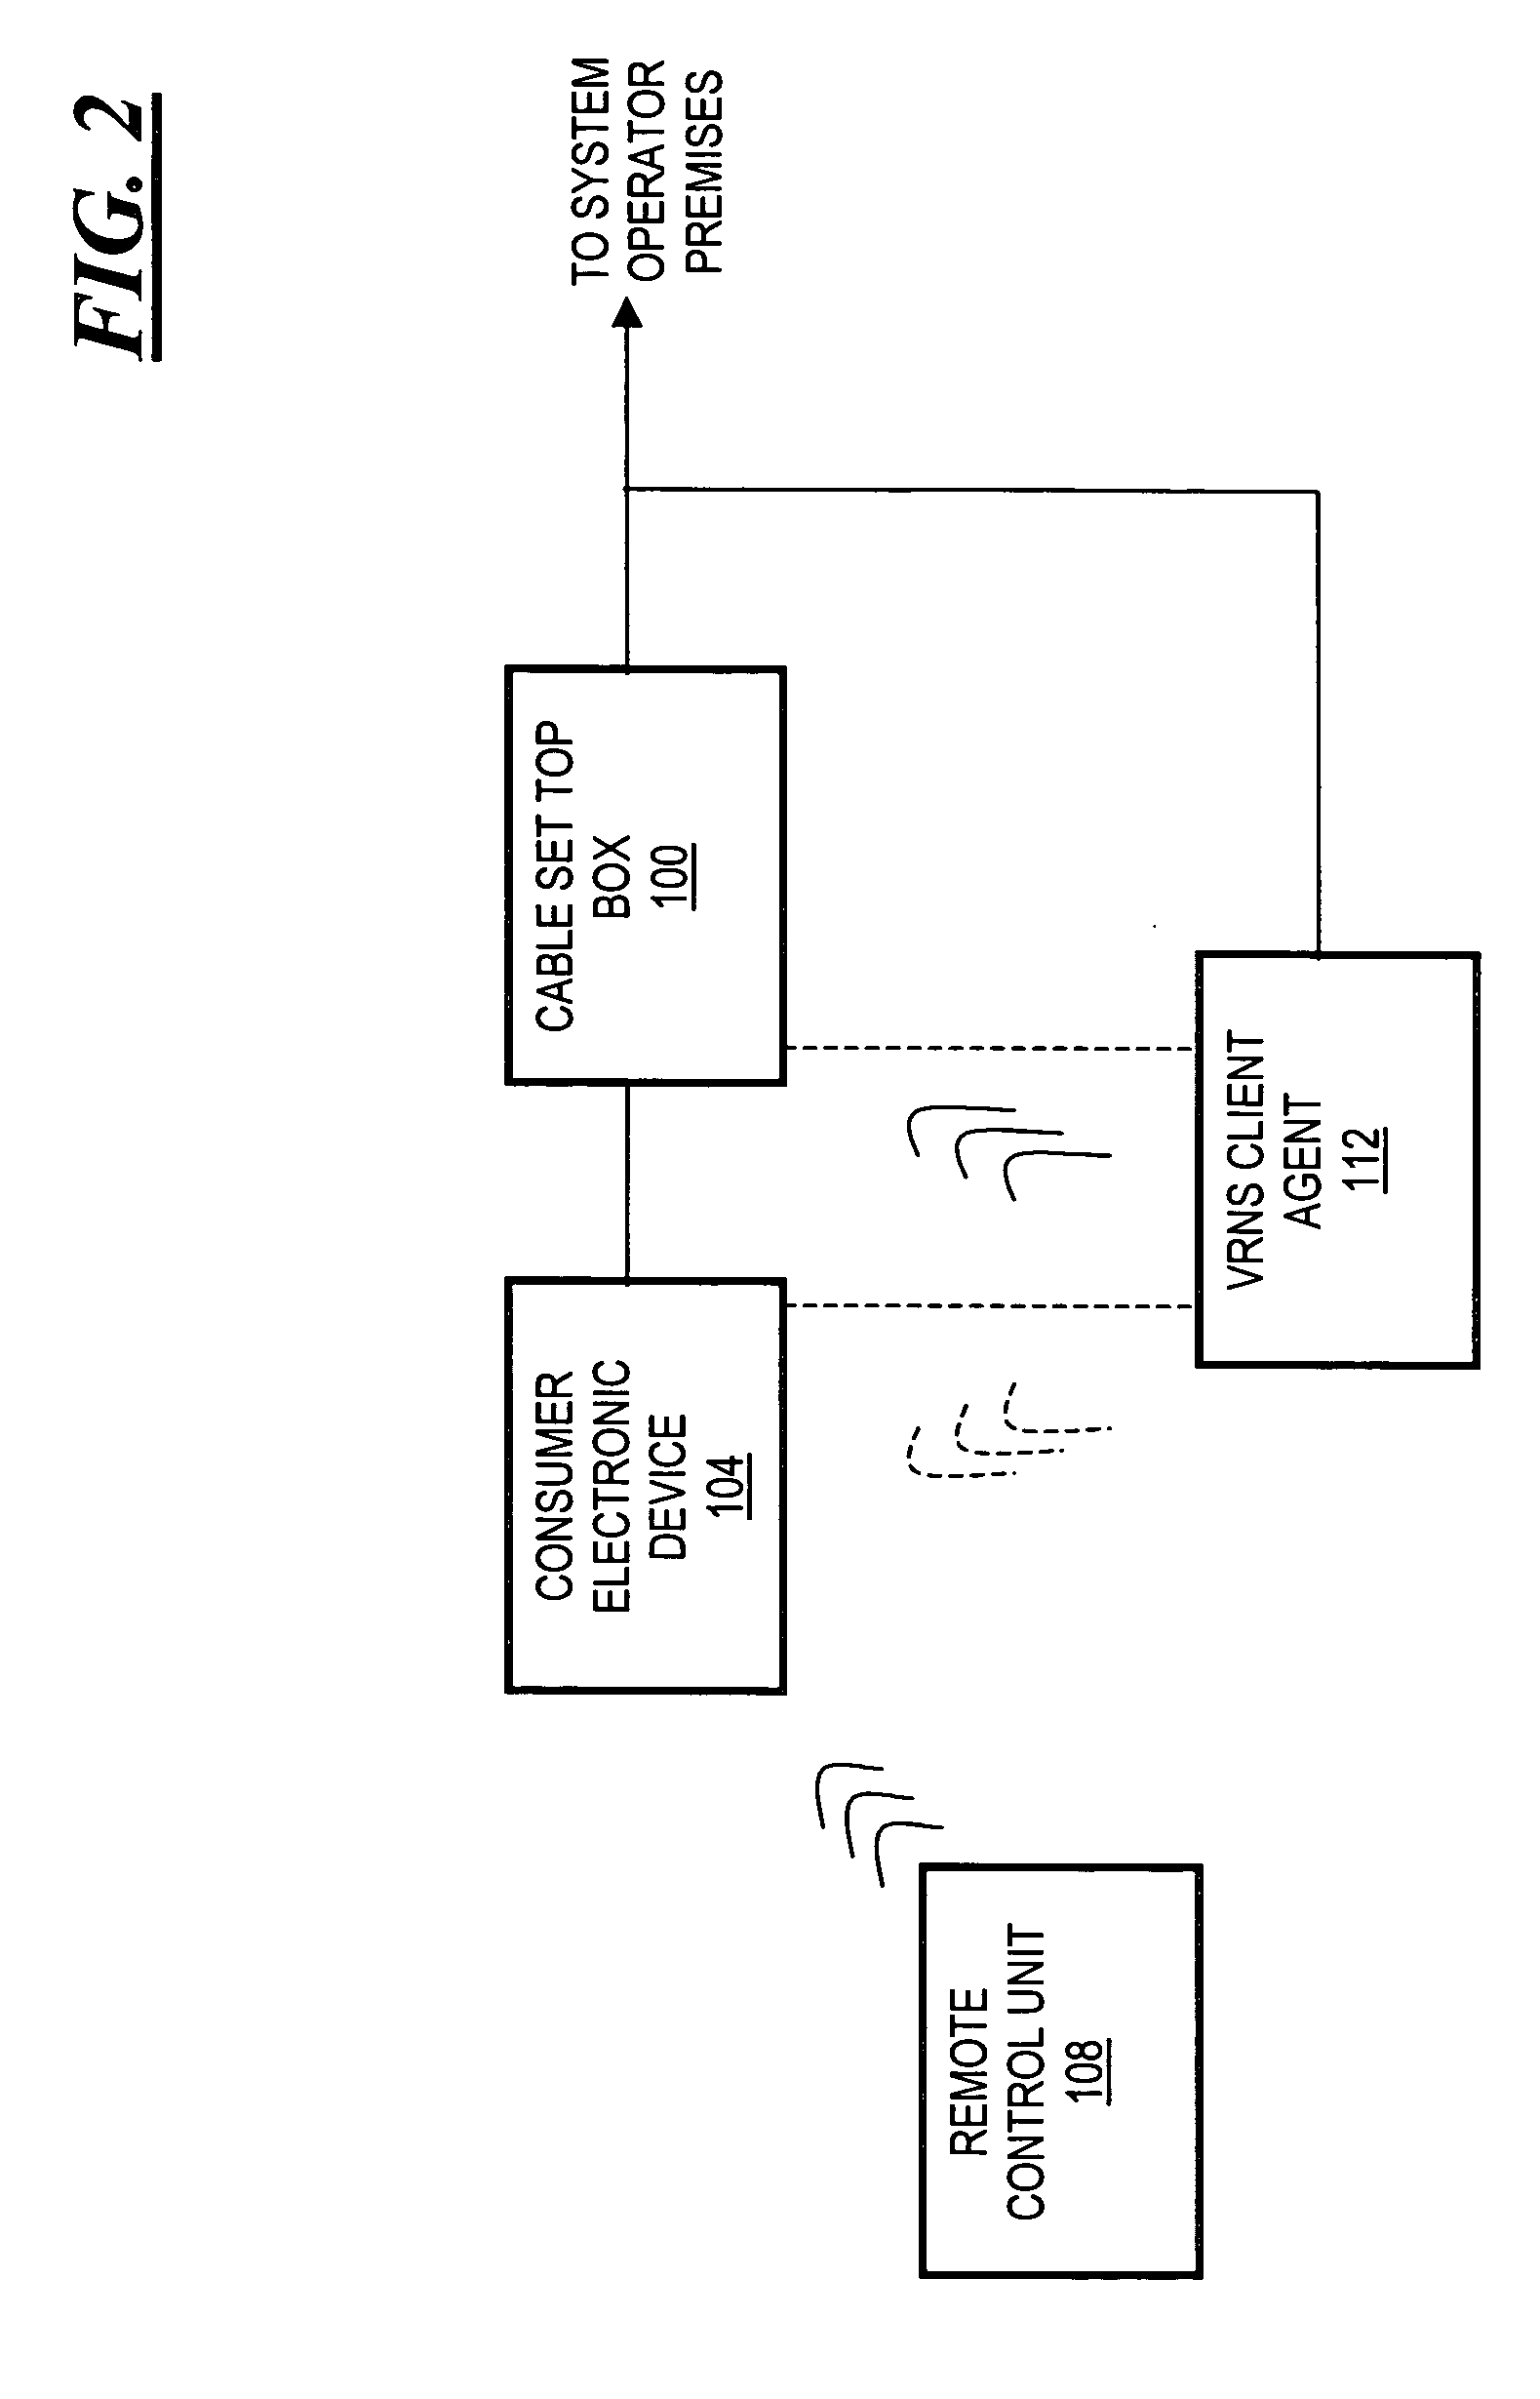 Methods and apparatus for providing services using speech recognition